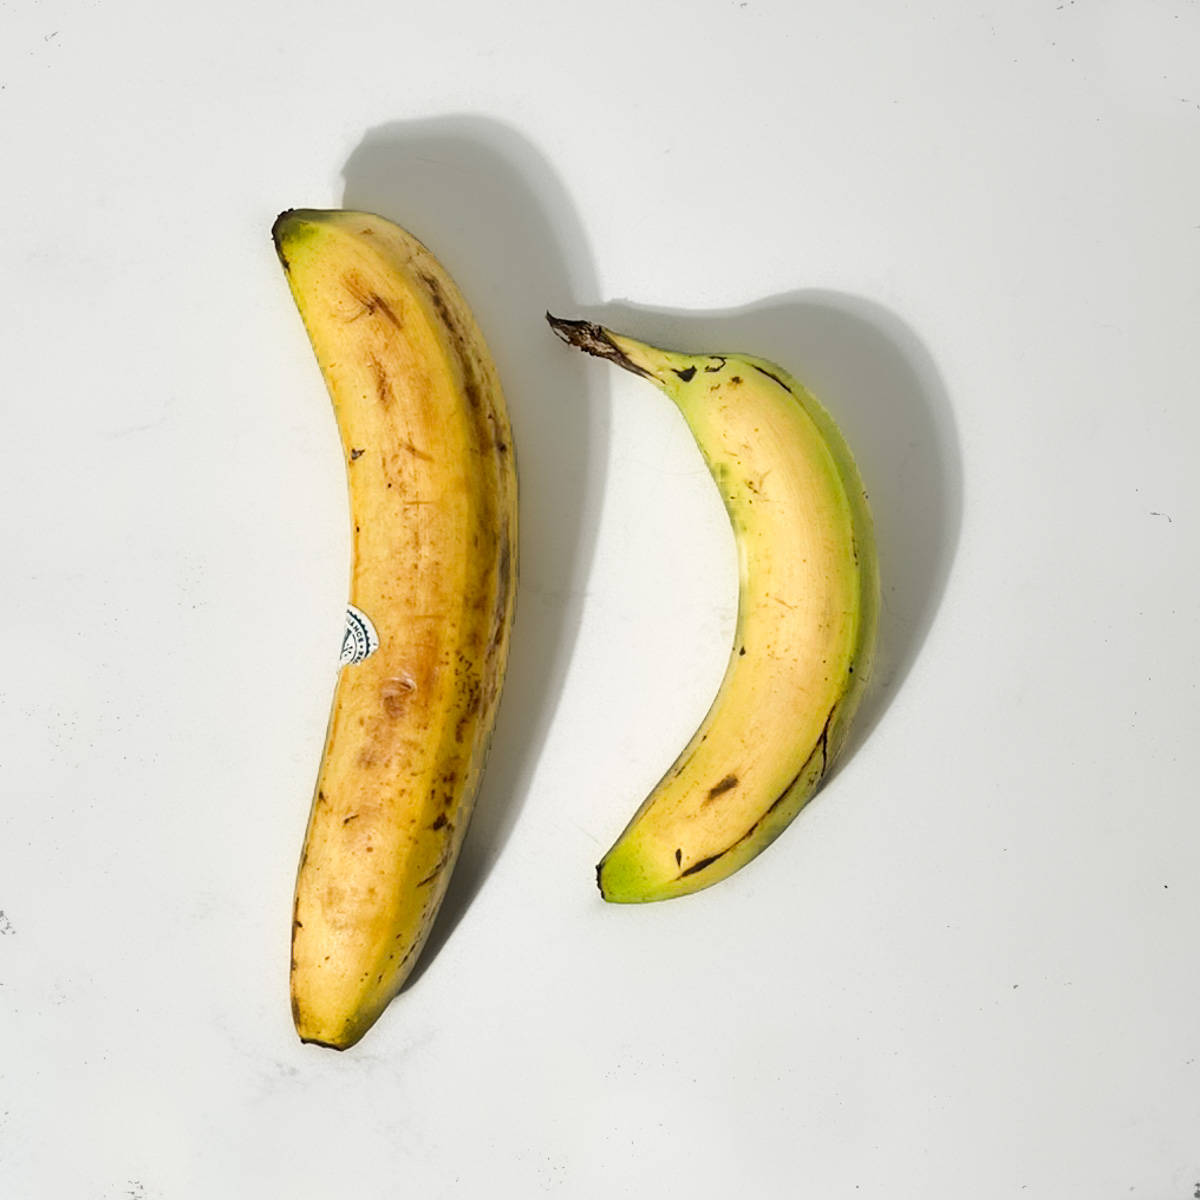 Two bananas of different sizes.